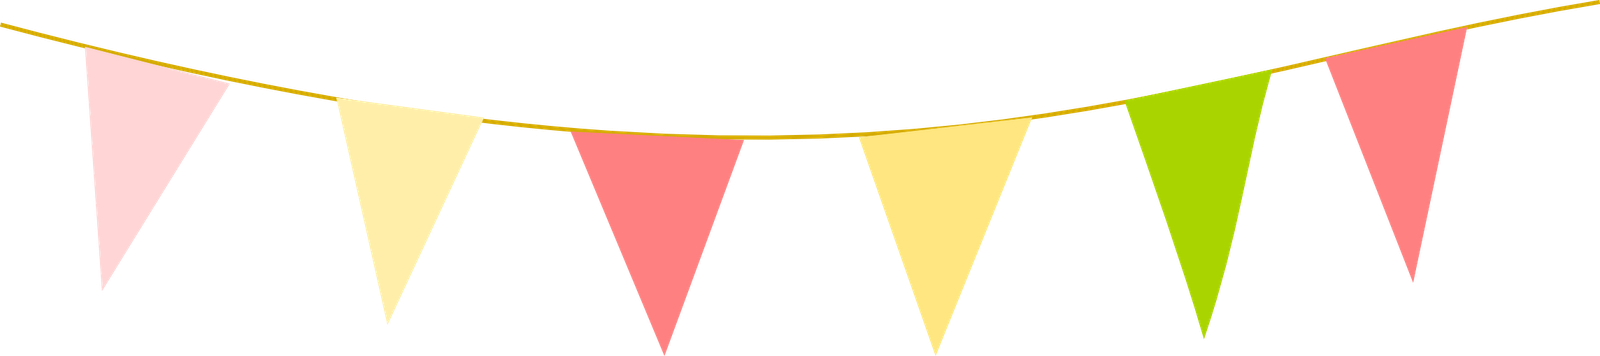 Party Flags Transparent PNG